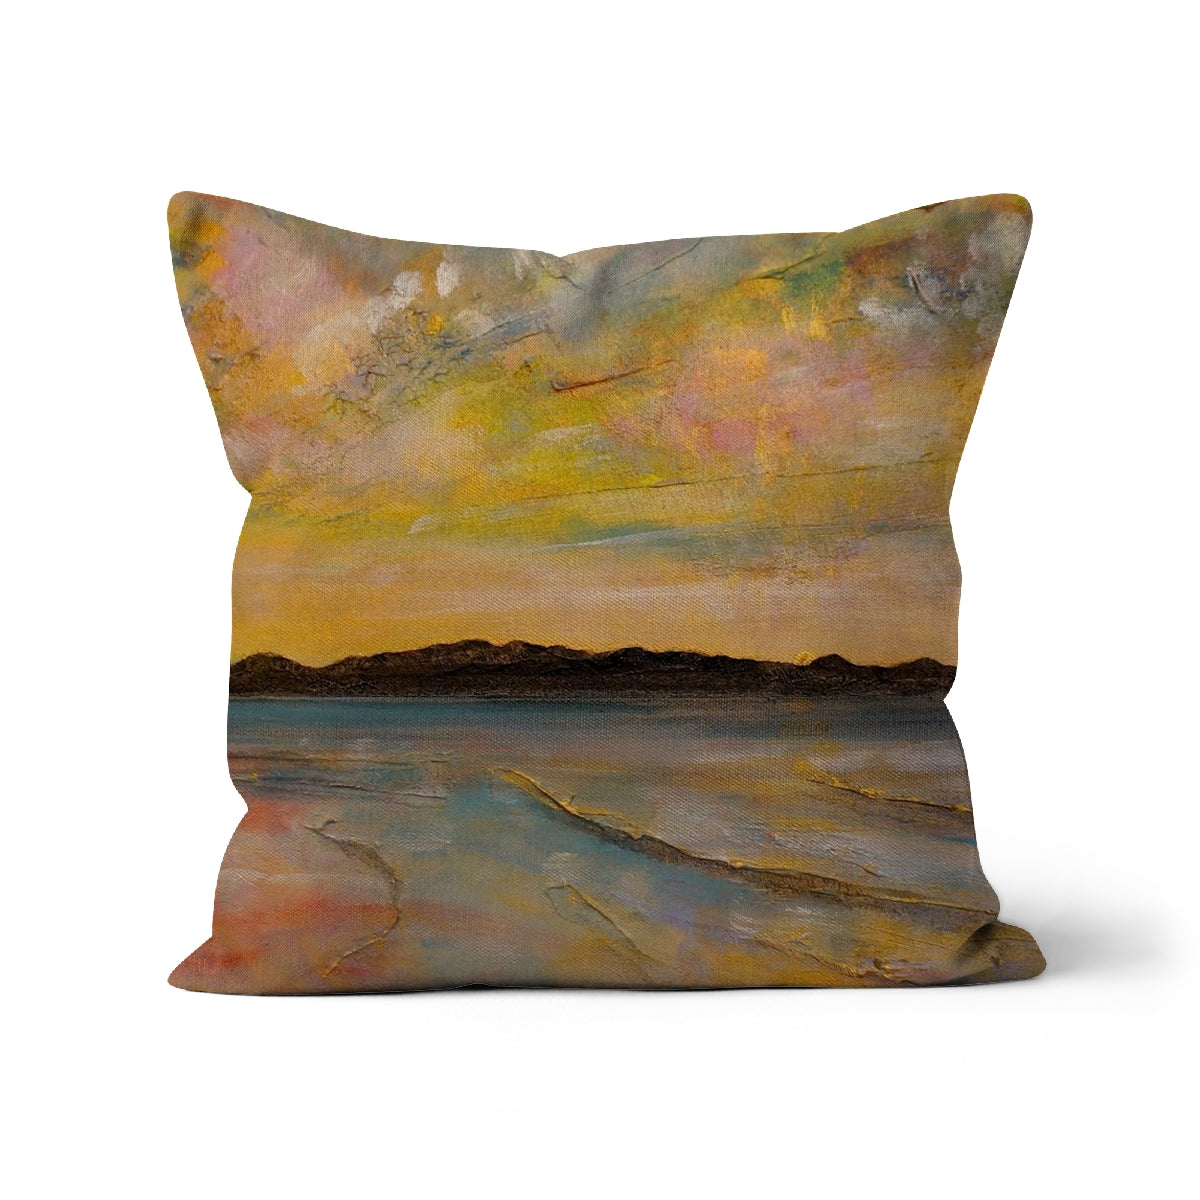 Vallay Island North Uist Art Gifts Cushion-Cushions-Hebridean Islands Art Gallery-Faux Suede-24"x24"-Paintings, Prints, Homeware, Art Gifts From Scotland By Scottish Artist Kevin Hunter